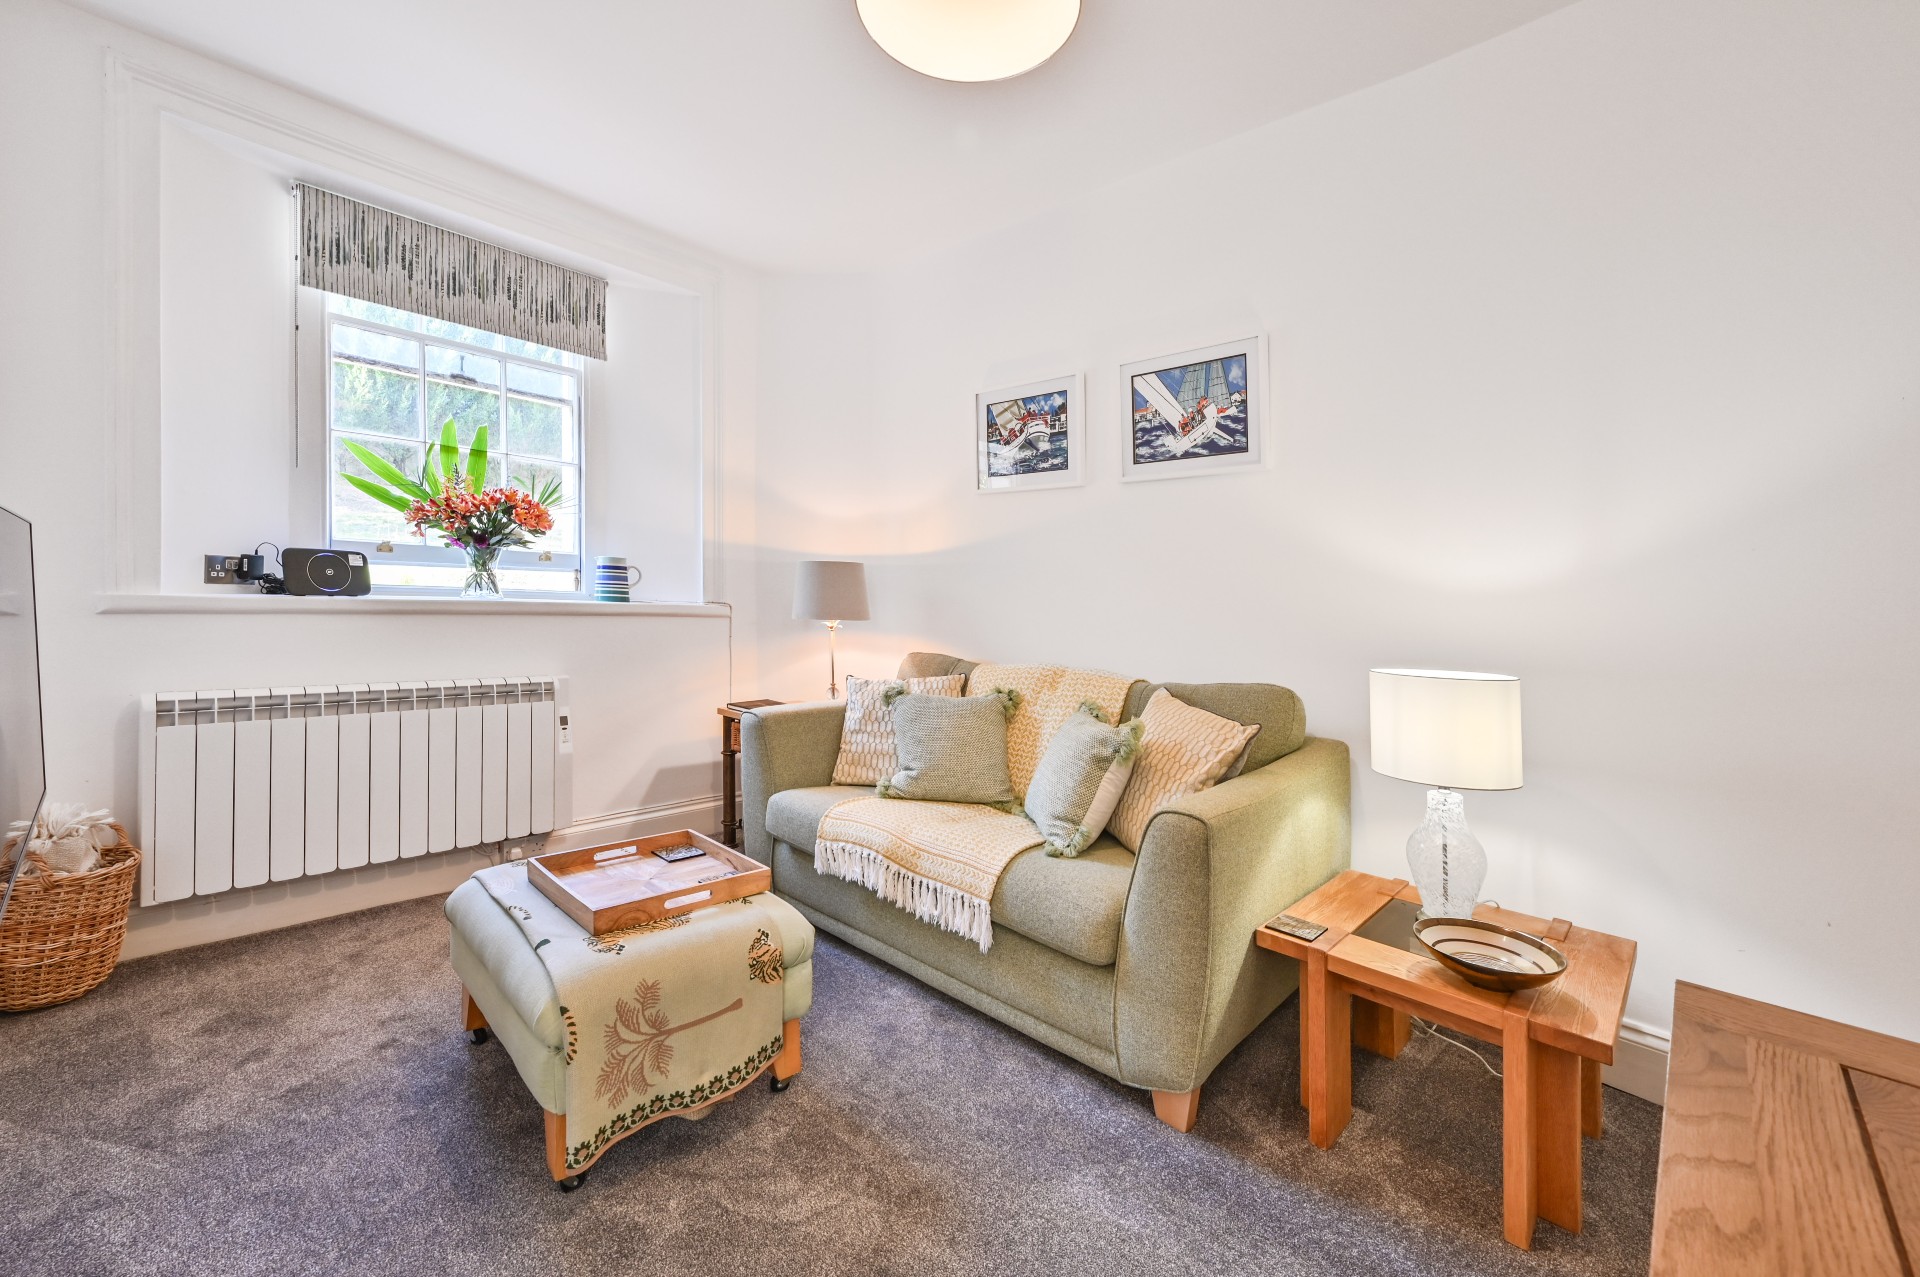 Tramontane Holiday Apartment in Hesketh Crescent on The English Riviera - Newly renovated apartment - sitting room area.